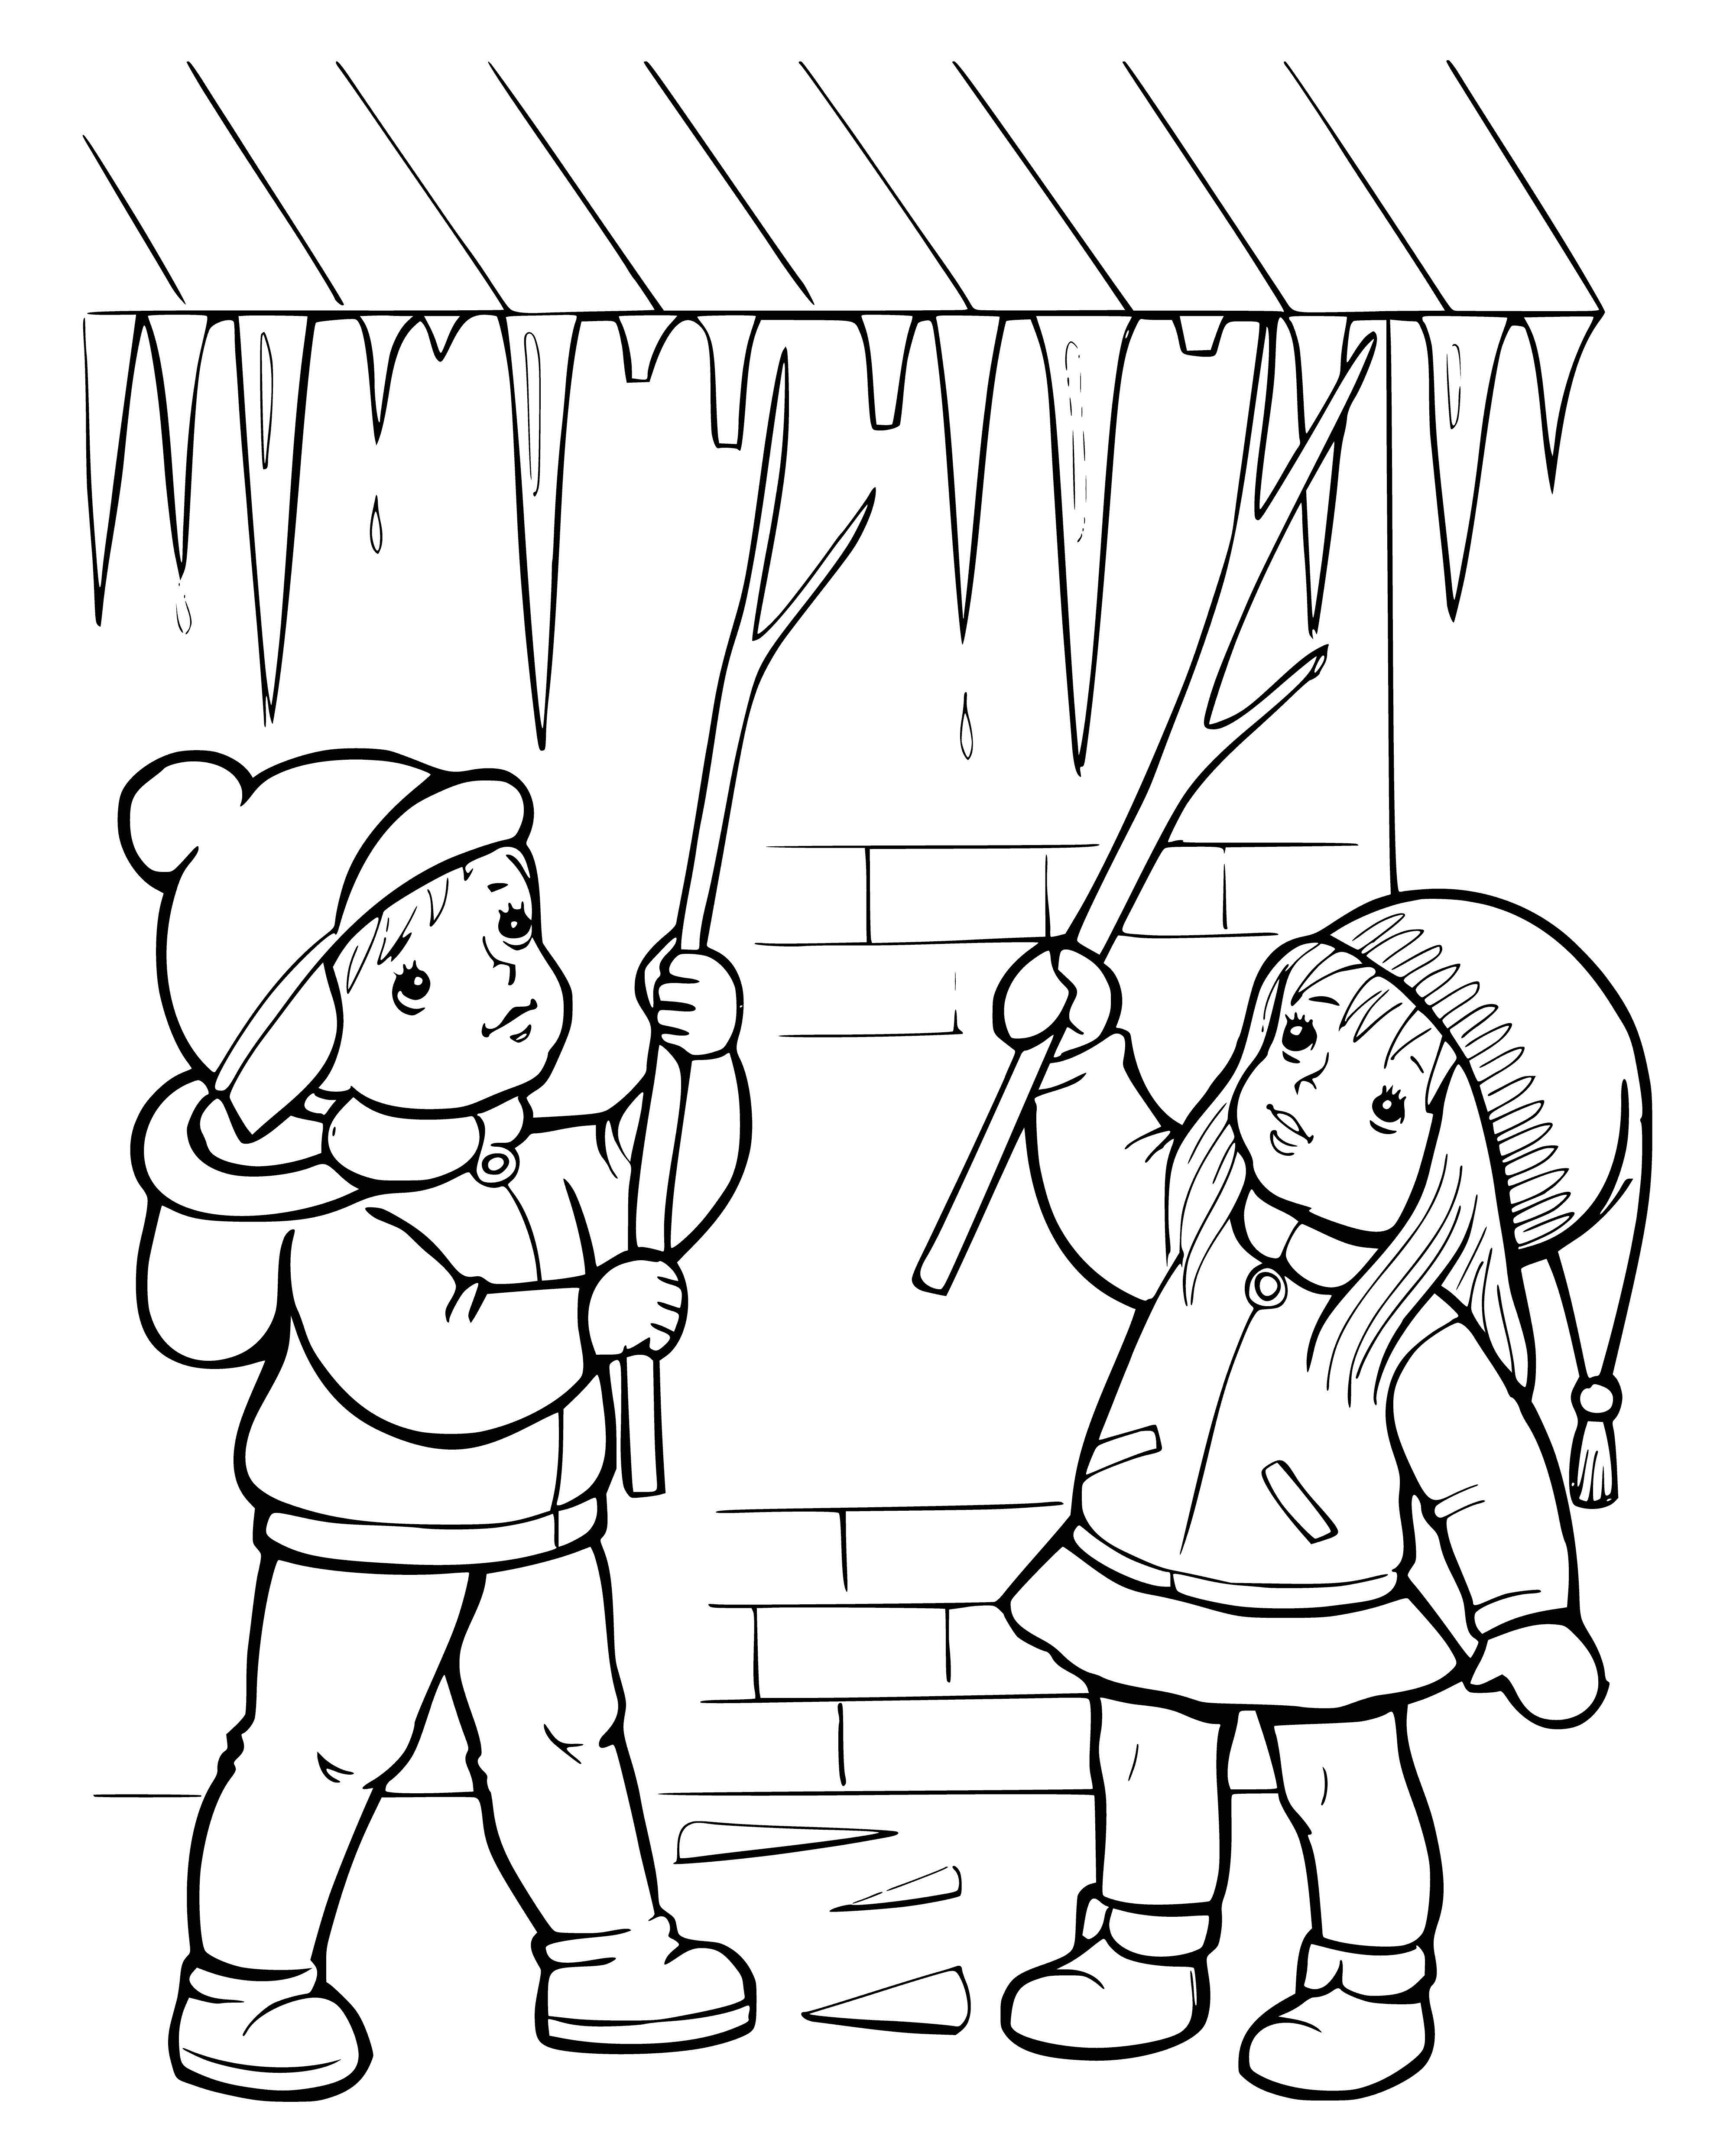 Icicles coloring page